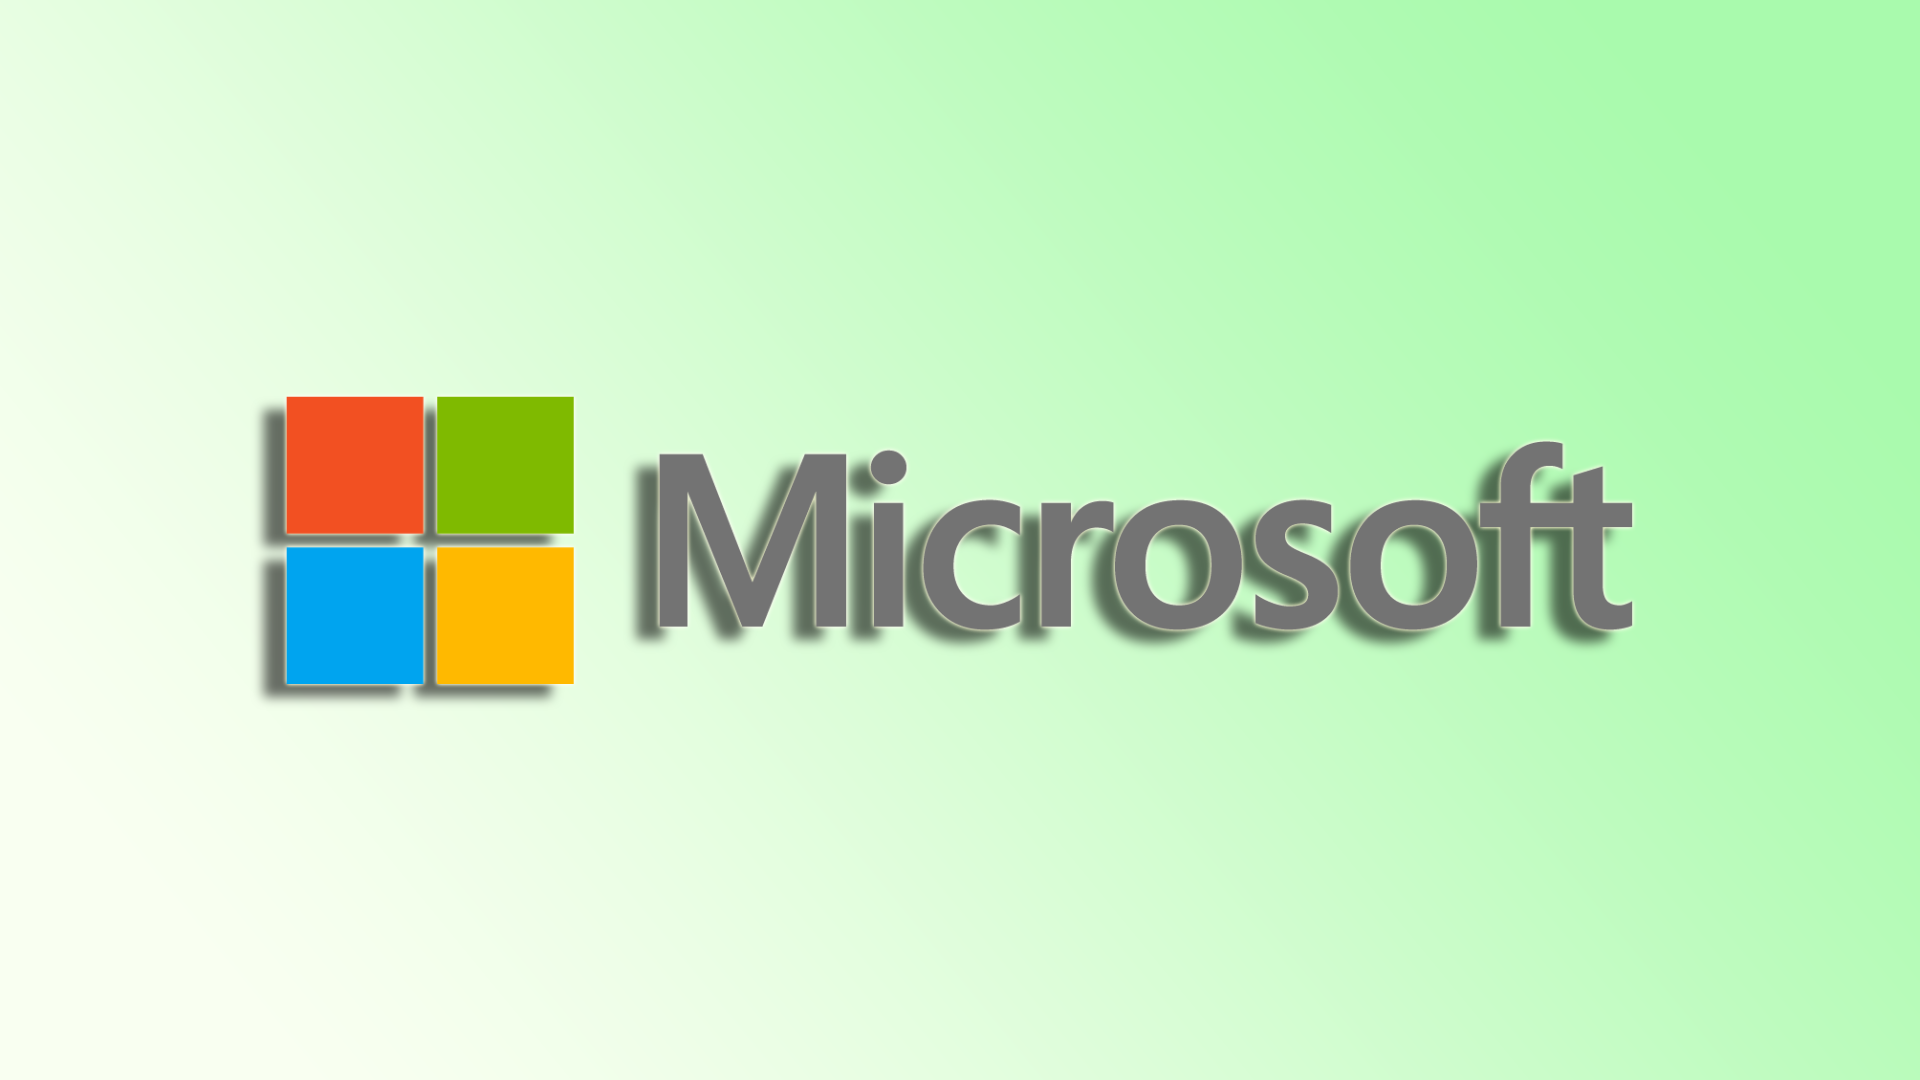 Microsoft has finally ended support for Windows 7 and Windows 8.1